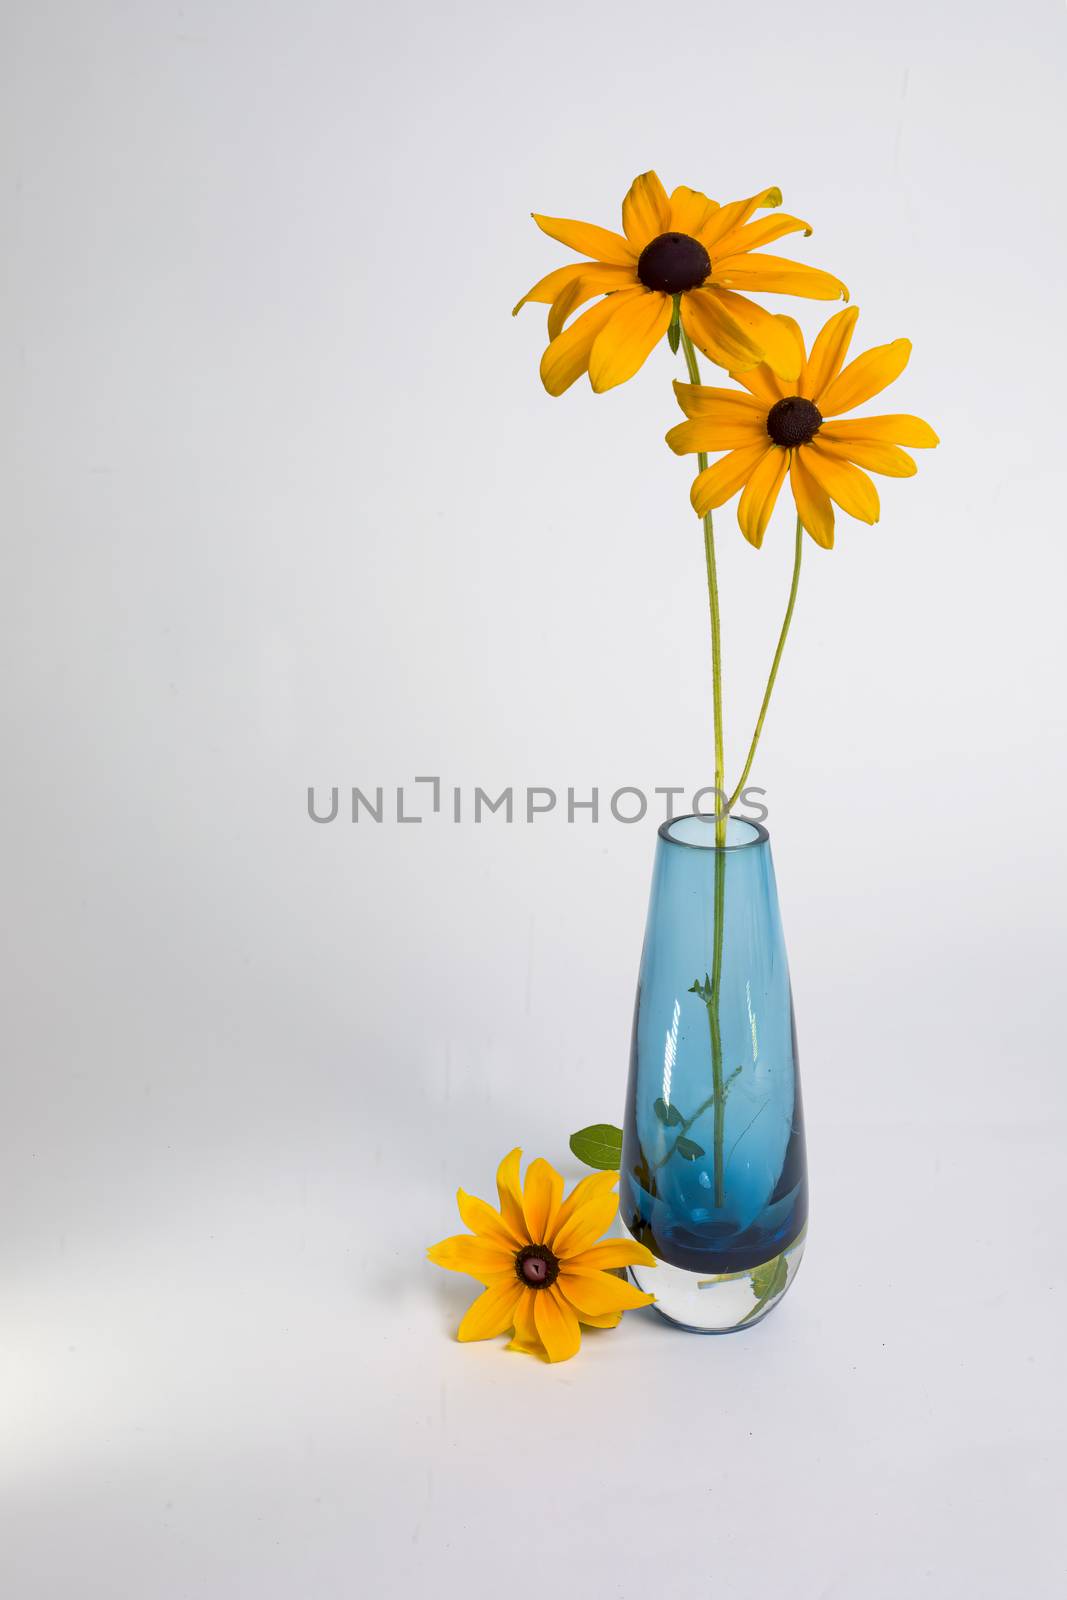 Black-eyed Susans with Blue Vase by CharlieFloyd